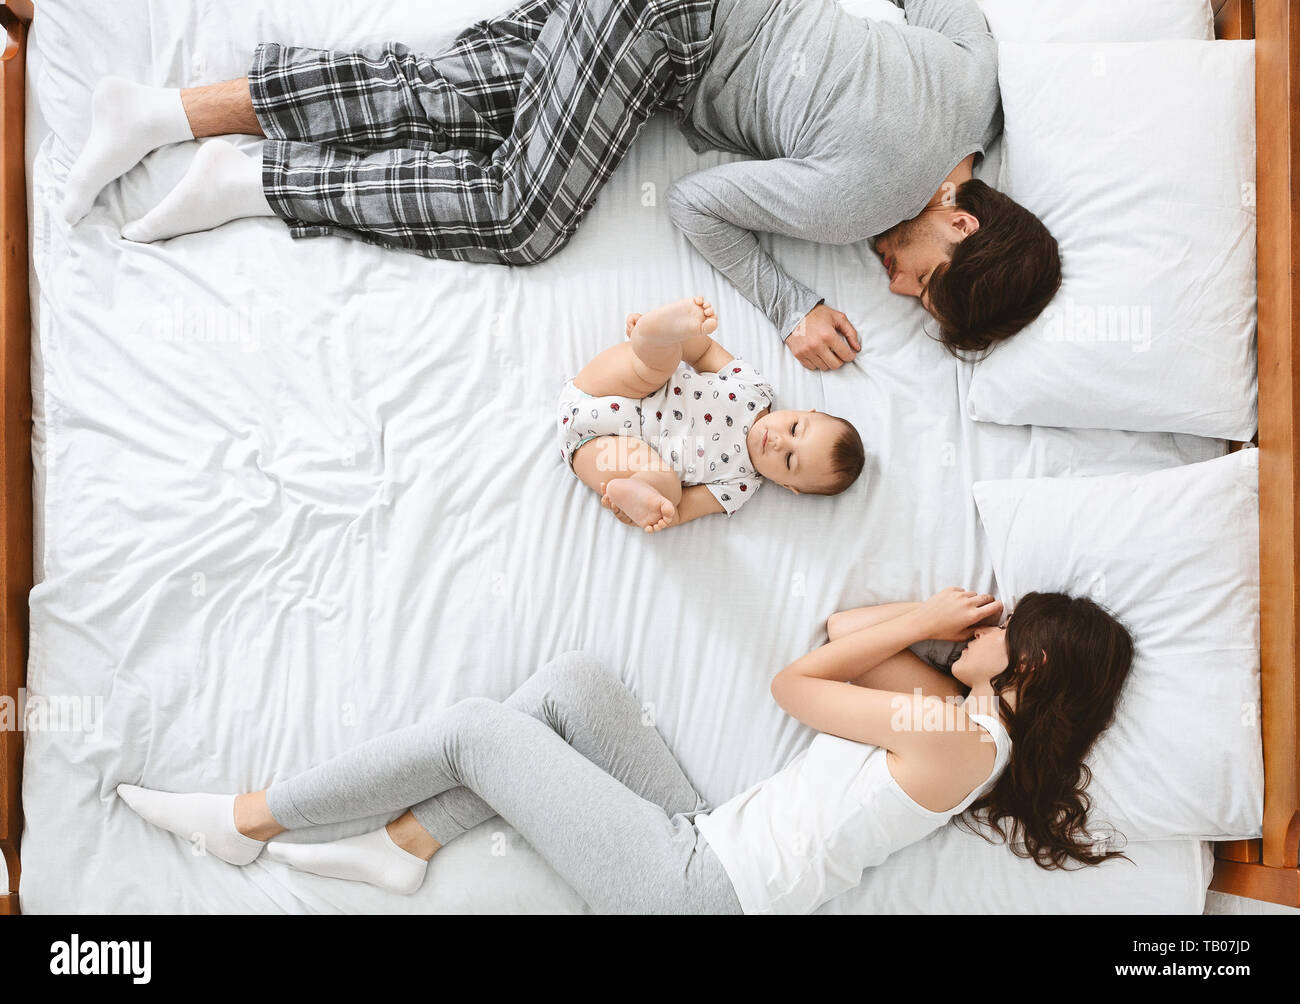 Little baby lying in the middle of bed, parents sleeping on sides Stock Photo